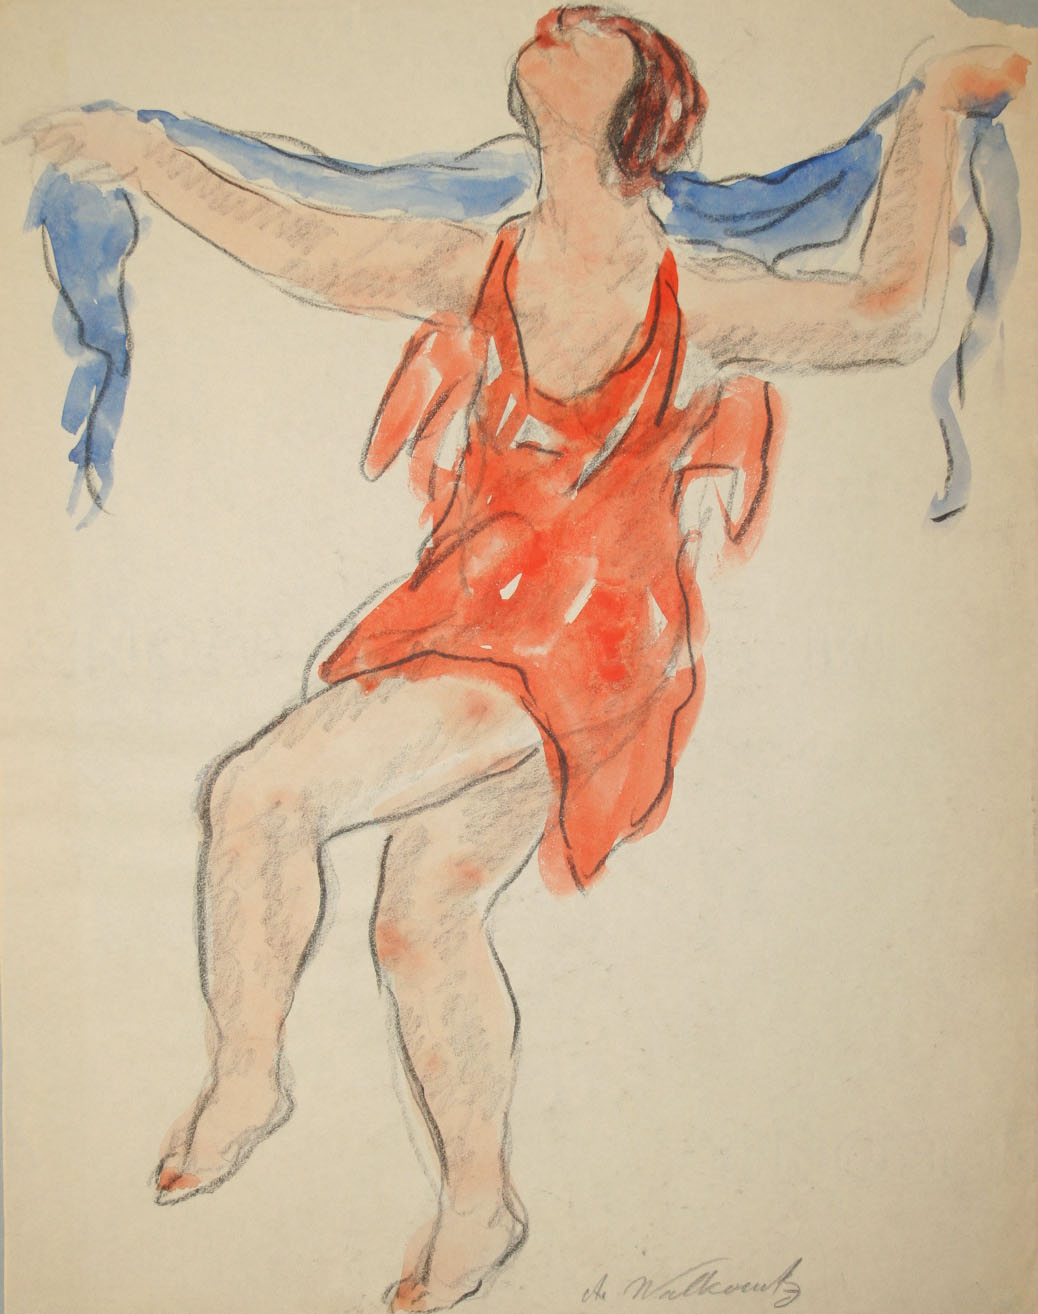 Abraham Walkowitz (American, 1878-1965), [<i>Isadora Duncan Study 04</i>], 20th c., ink, watercolor, graphite. Museums Collections, Gift of Ms. Virginia Zabriskie